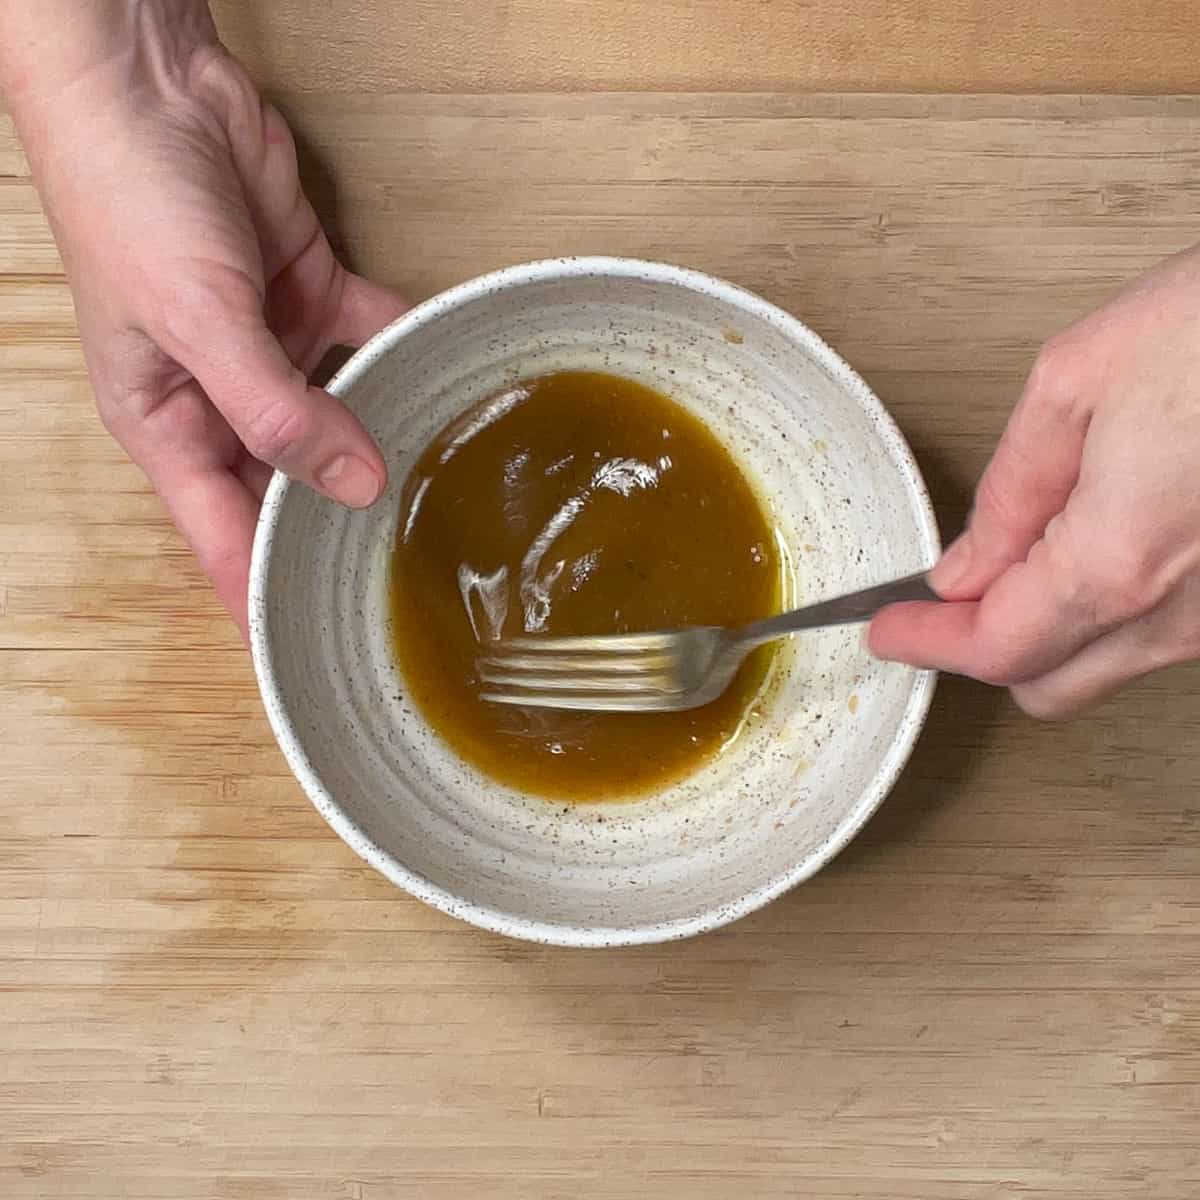 Mixing together the salad dressing ingredients in a white ceramic bowl. 